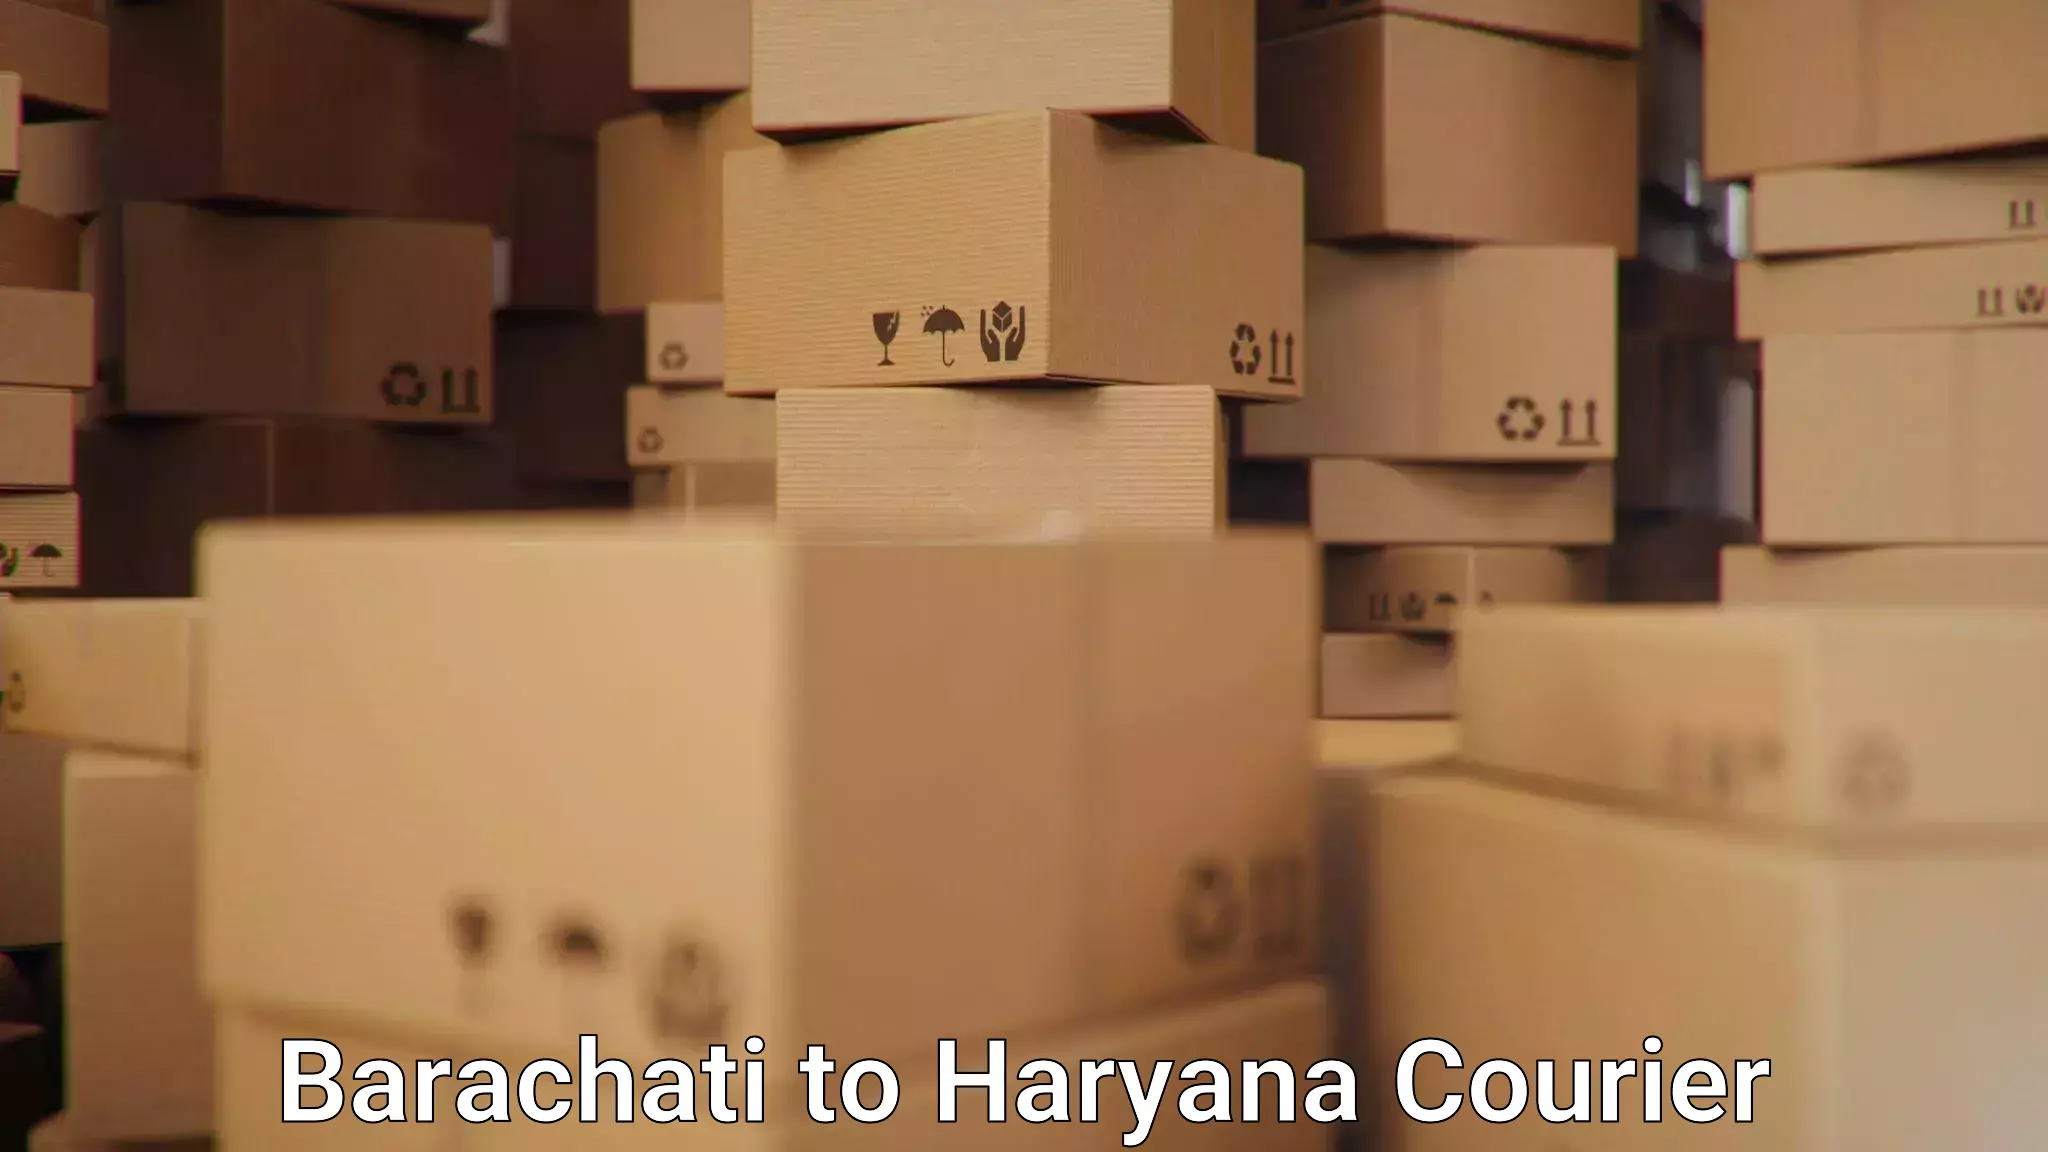 Efficient parcel delivery Barachati to NCR Haryana